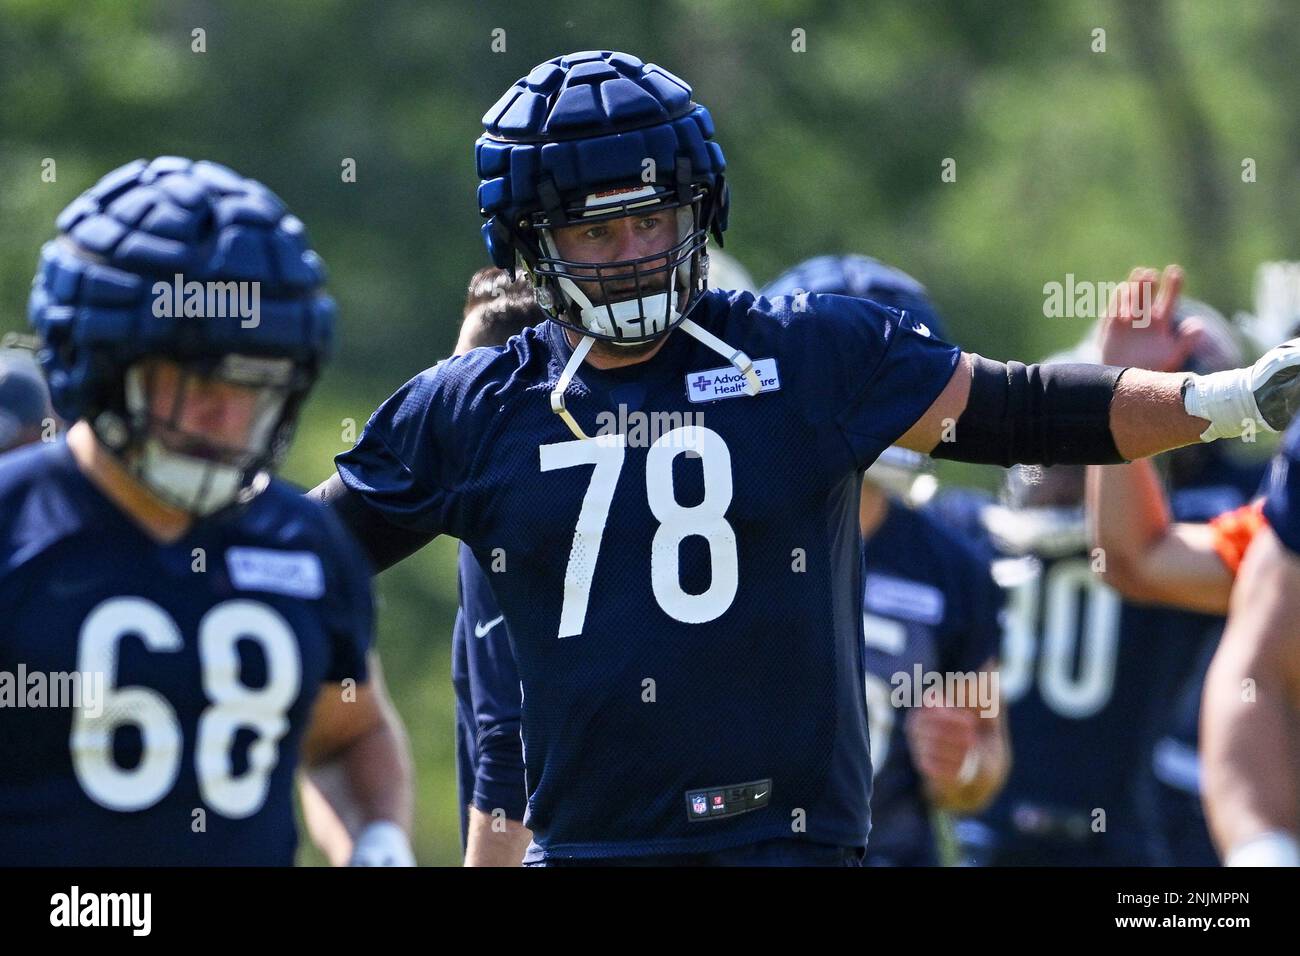 LAKE FOREST, IL - JULY 27: Chicago Bears offensive linemen Riley